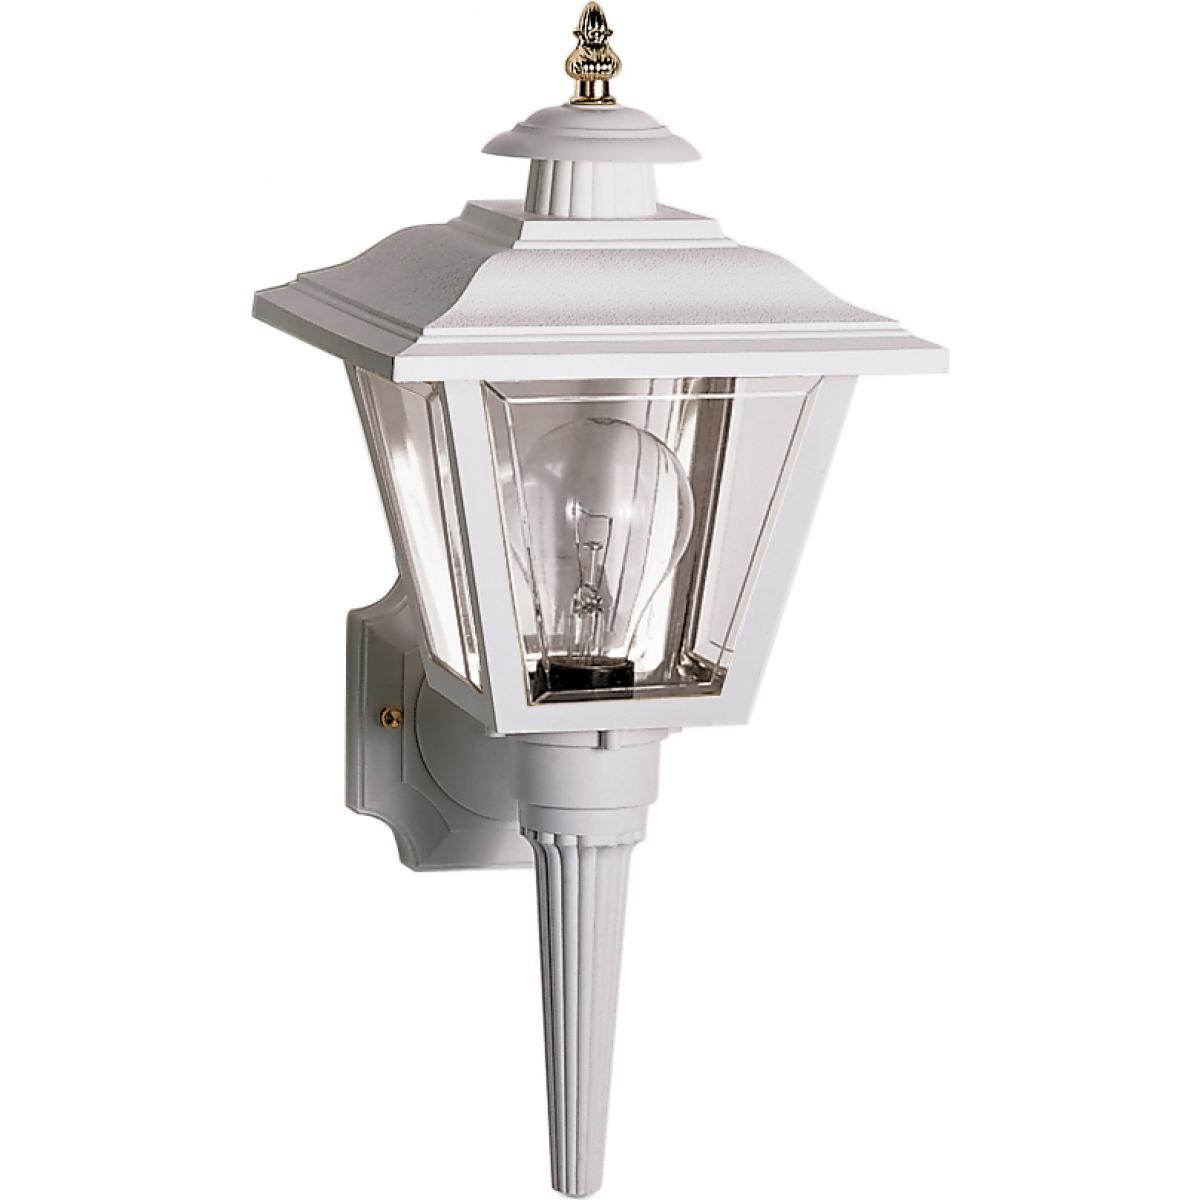 17" Wall Lantern Coach Lantern with Brass Trimmed Acrylic Panels Outdoor Nuvo Lighting 